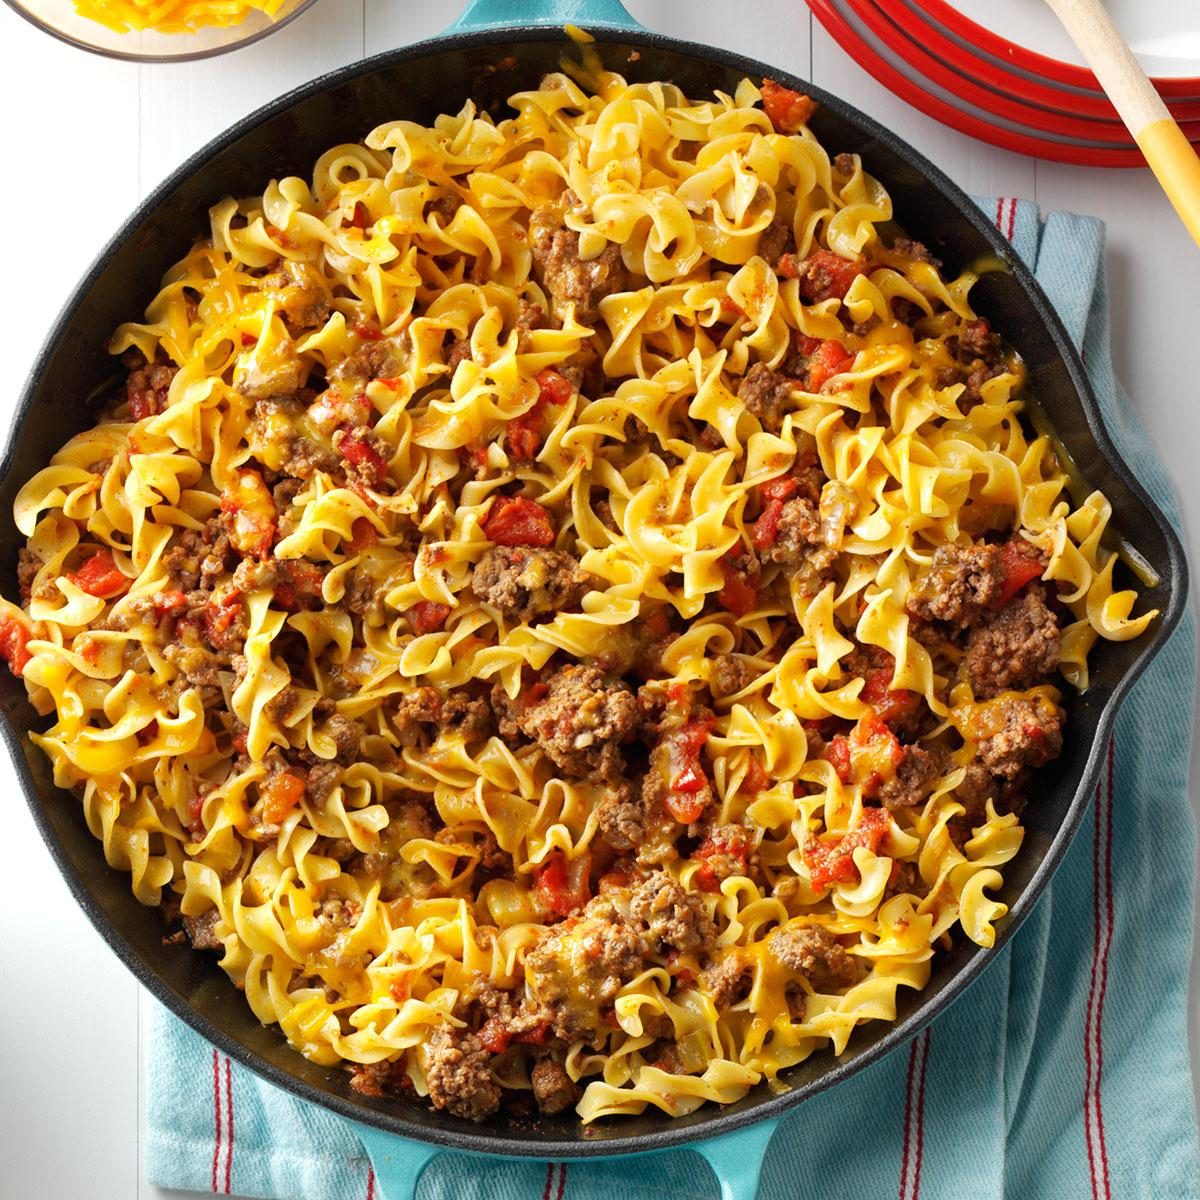 <p>A friend gave me this recipe. My husband likes the hearty blend of beef, onion and tomatoes. I like it because I can get it to the table so quickly. —Deborah Elliott, Ridge Spring, South Carolina</p> <div class="listicle-page__buttons"> <div class="listicle-page__cta-button"><a href='https://www.tasteofhome.com/recipes/chili-beef-noodle-skillet/'>Go to Recipe</a></div> </div>